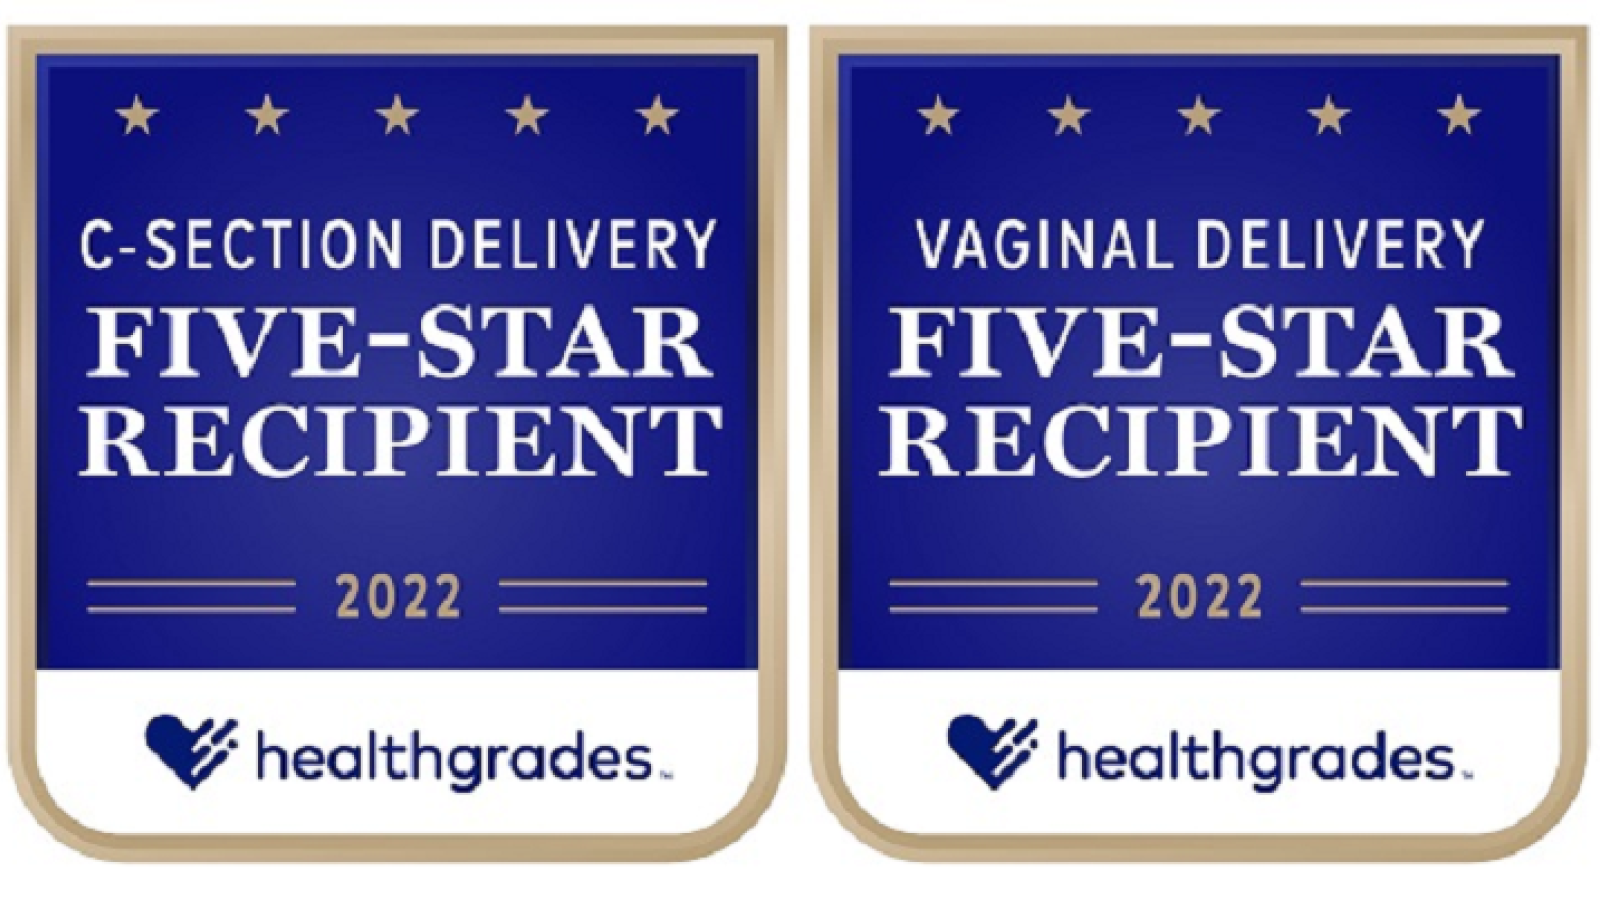 Guthrie Hospitals Achieve 5-Star Ratings for Labor and Delivery by Healthgrades